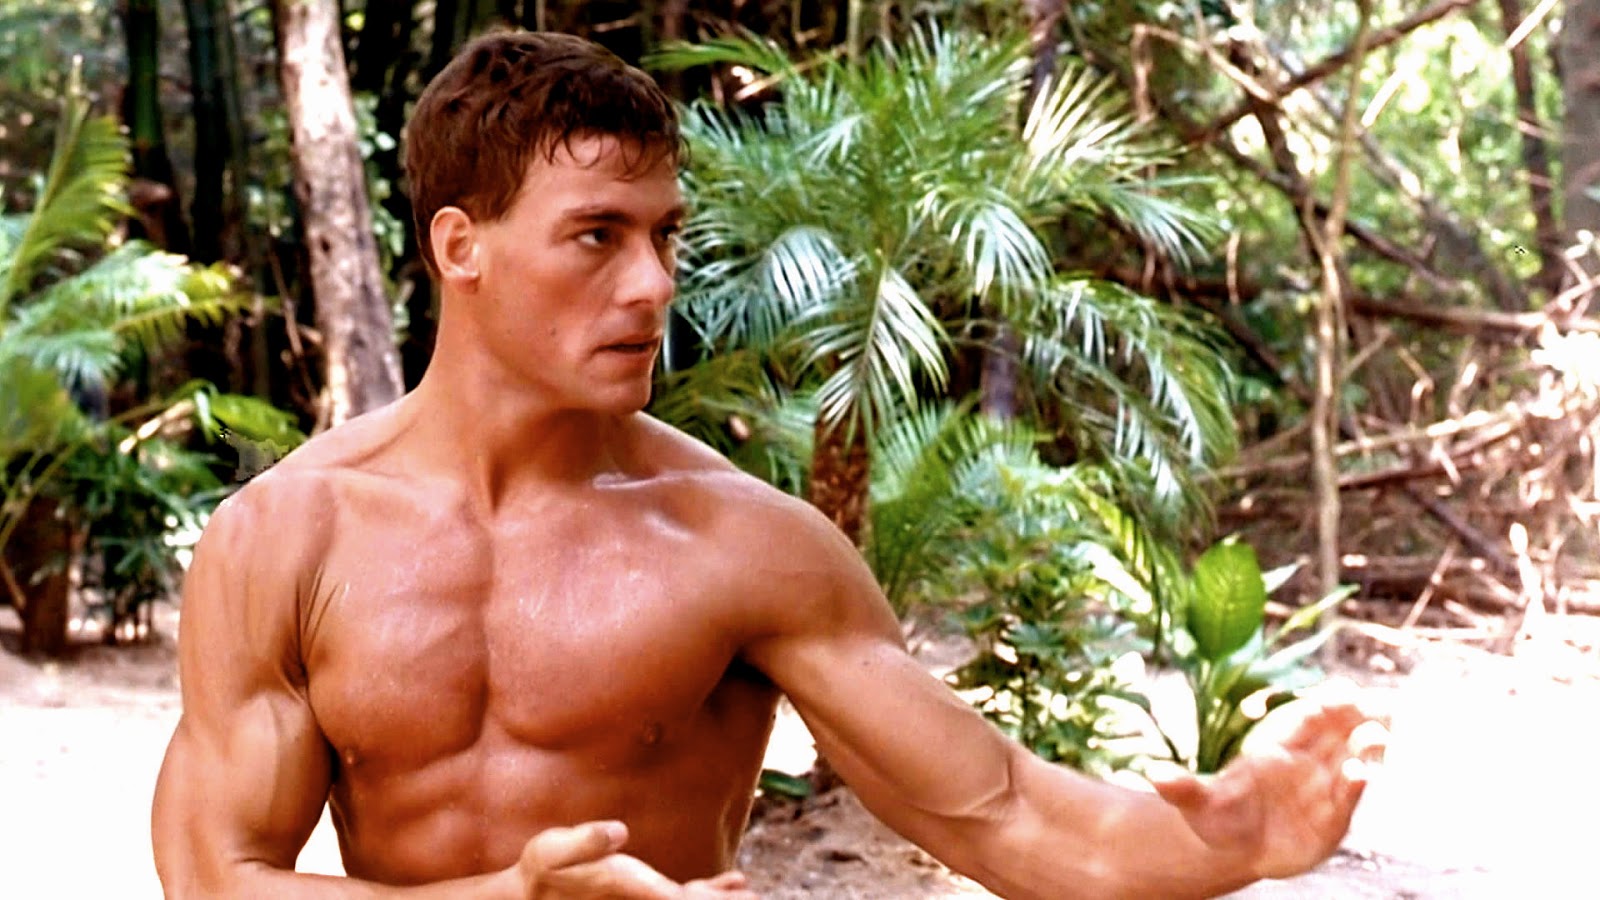 Top 10 Jean Claude Van Damme Movies (fans need to see!) |